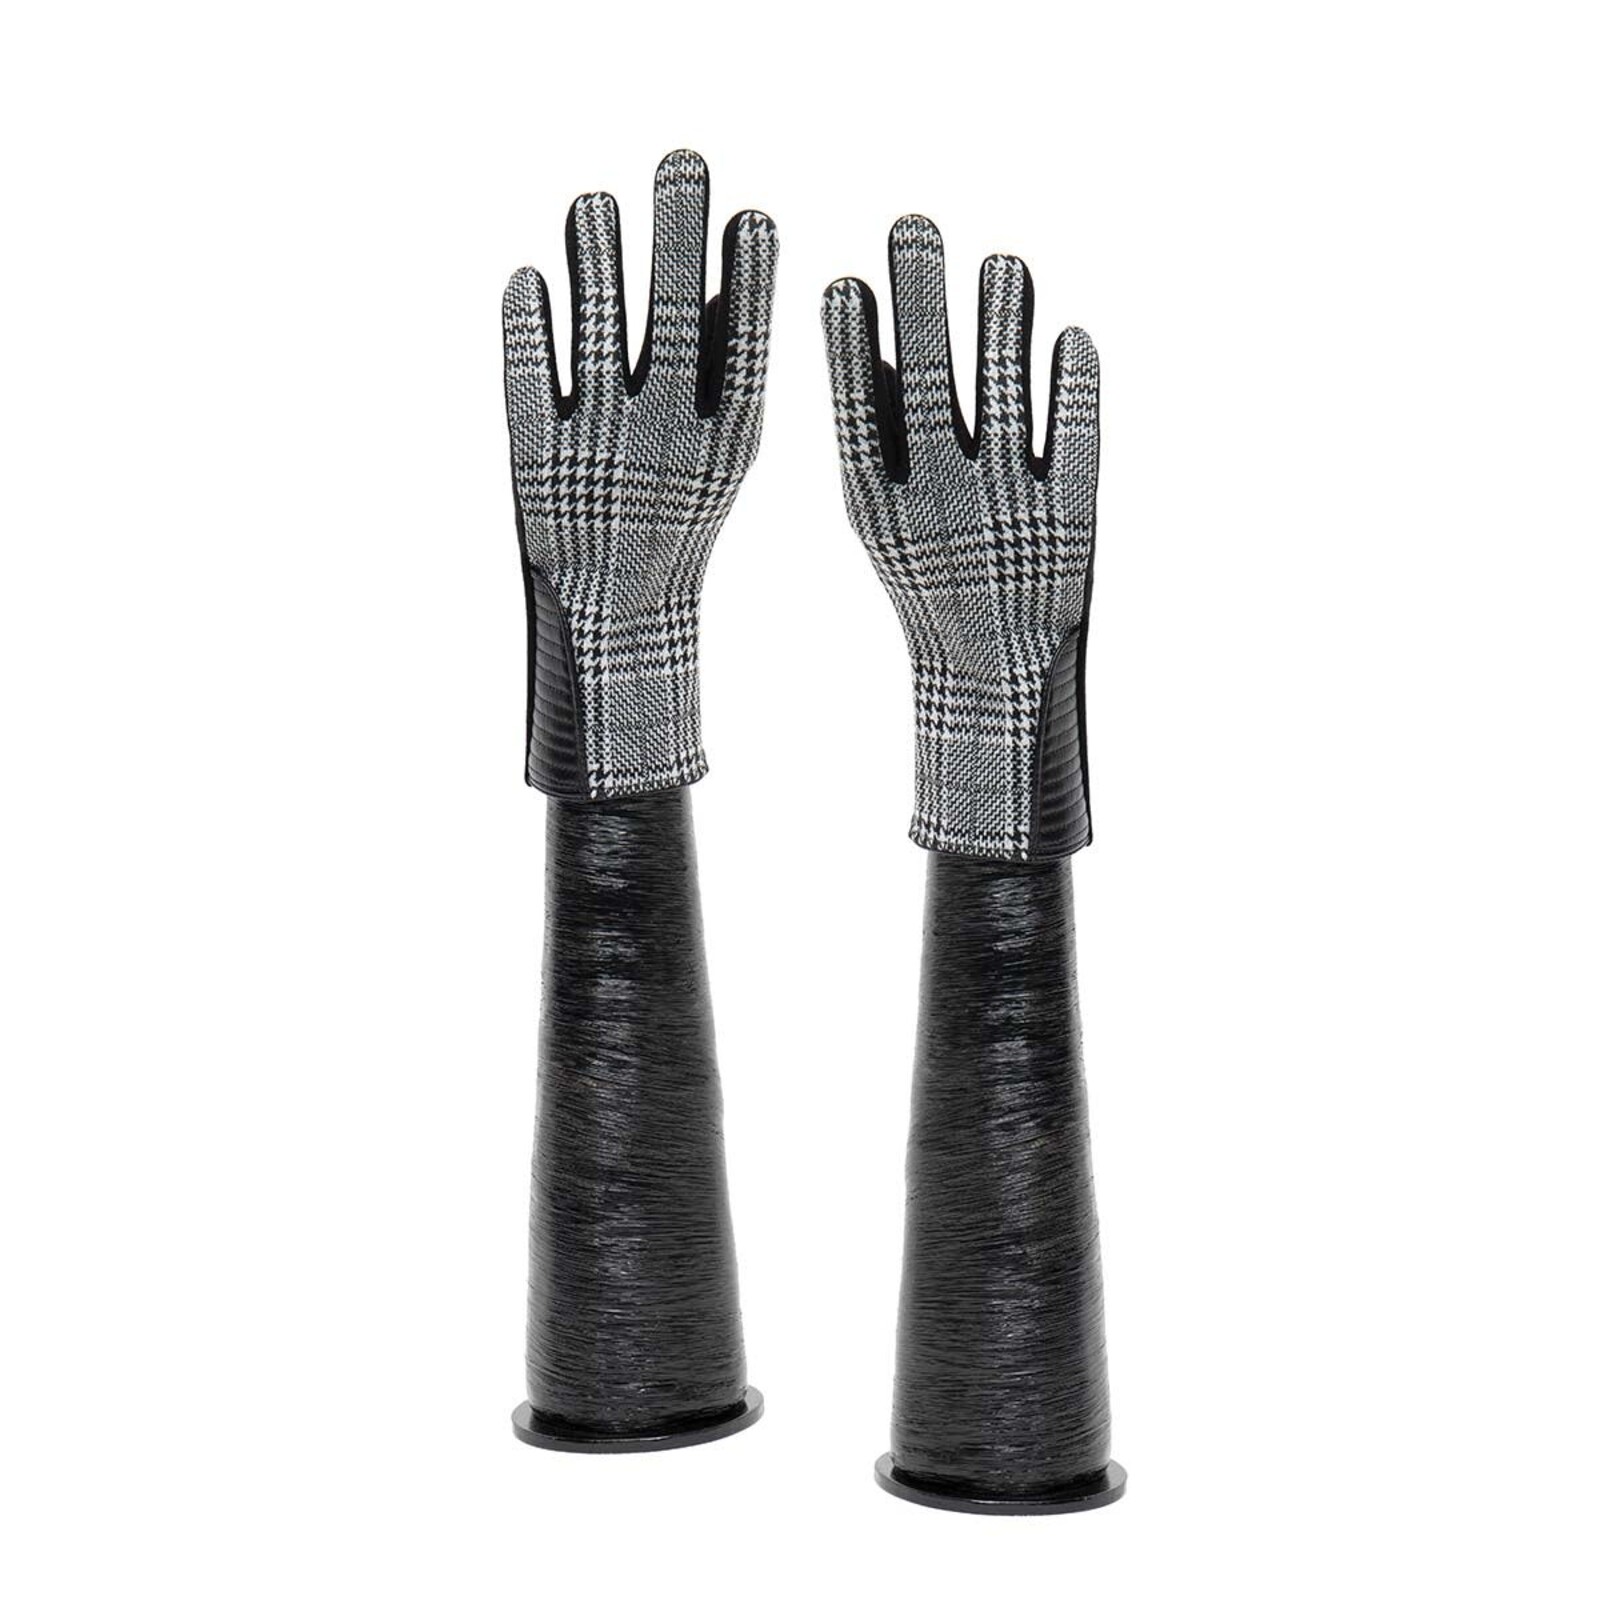 Meravic Black and White Plaid Gloves with Black Palm  X8035 loading=